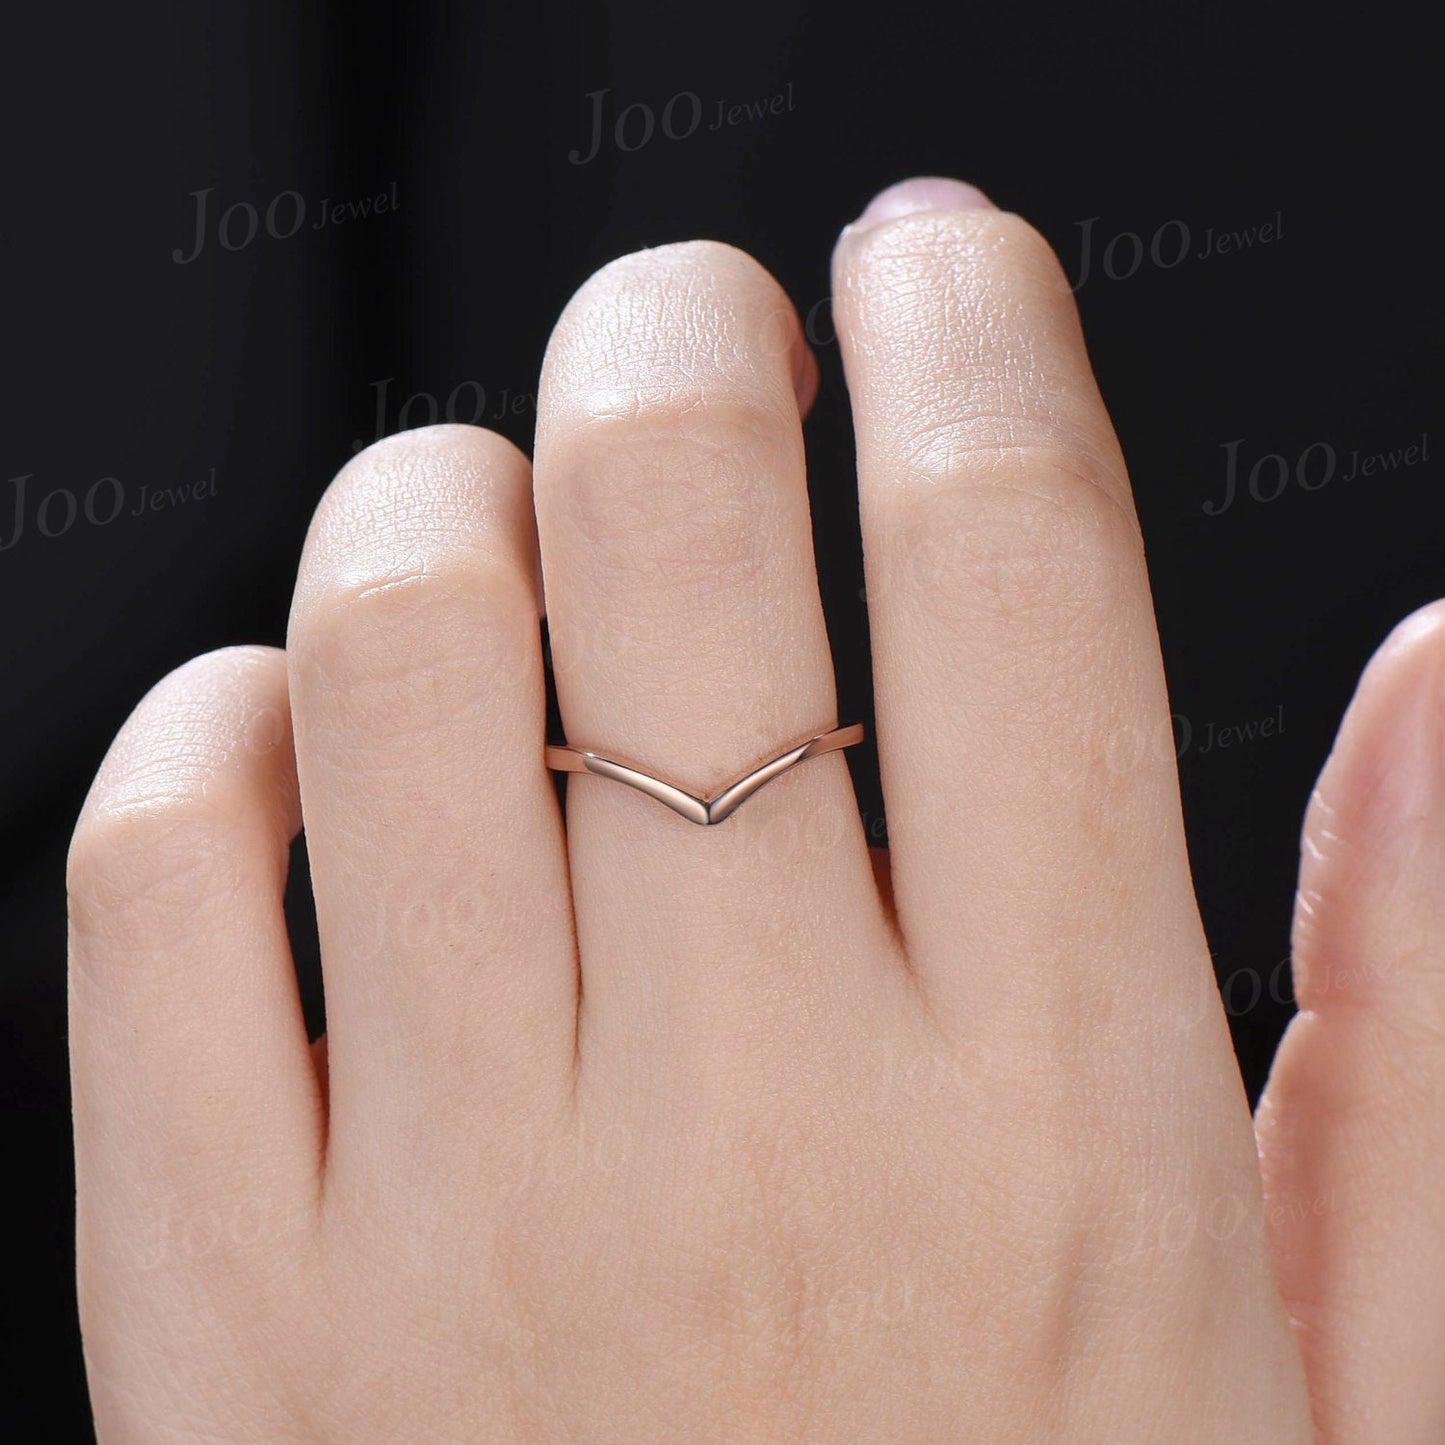 14K Solid Gold Plain Band Stacking Ring|Simple Curved Wedding Band|Chevron Contour Ring Women | V Shaped Basic Nesting Band Anniversary Gift